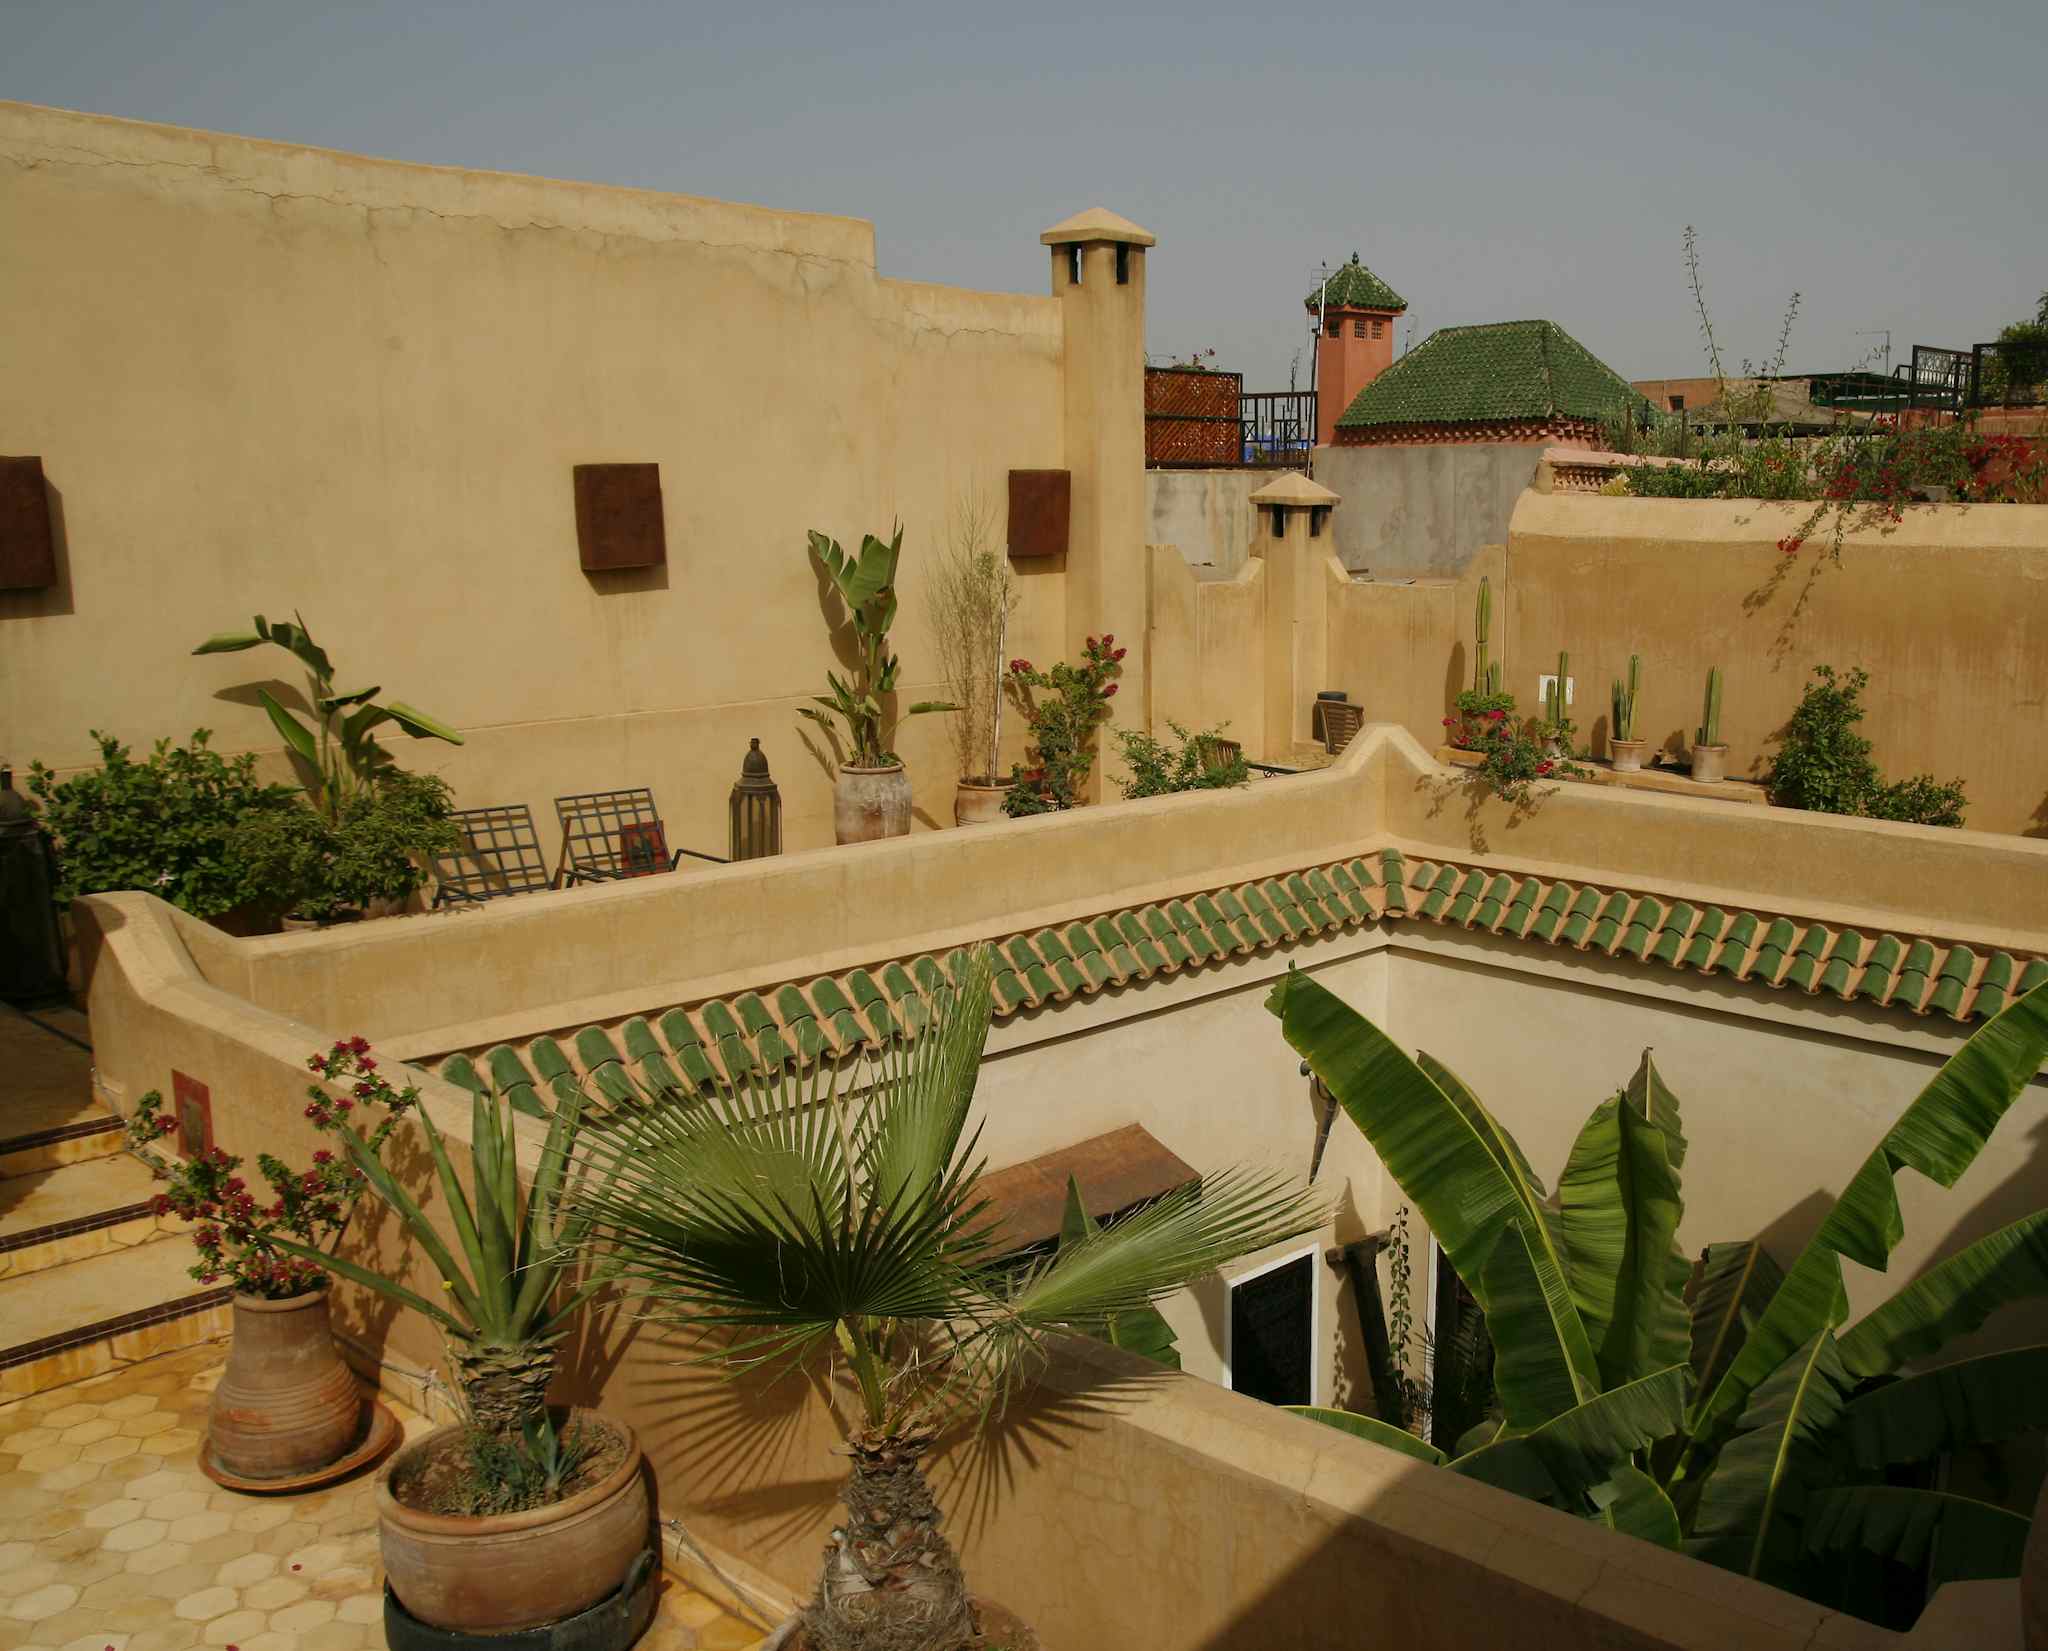 A rooftop view of a traditional riad in Marrakesh, Morocco. 